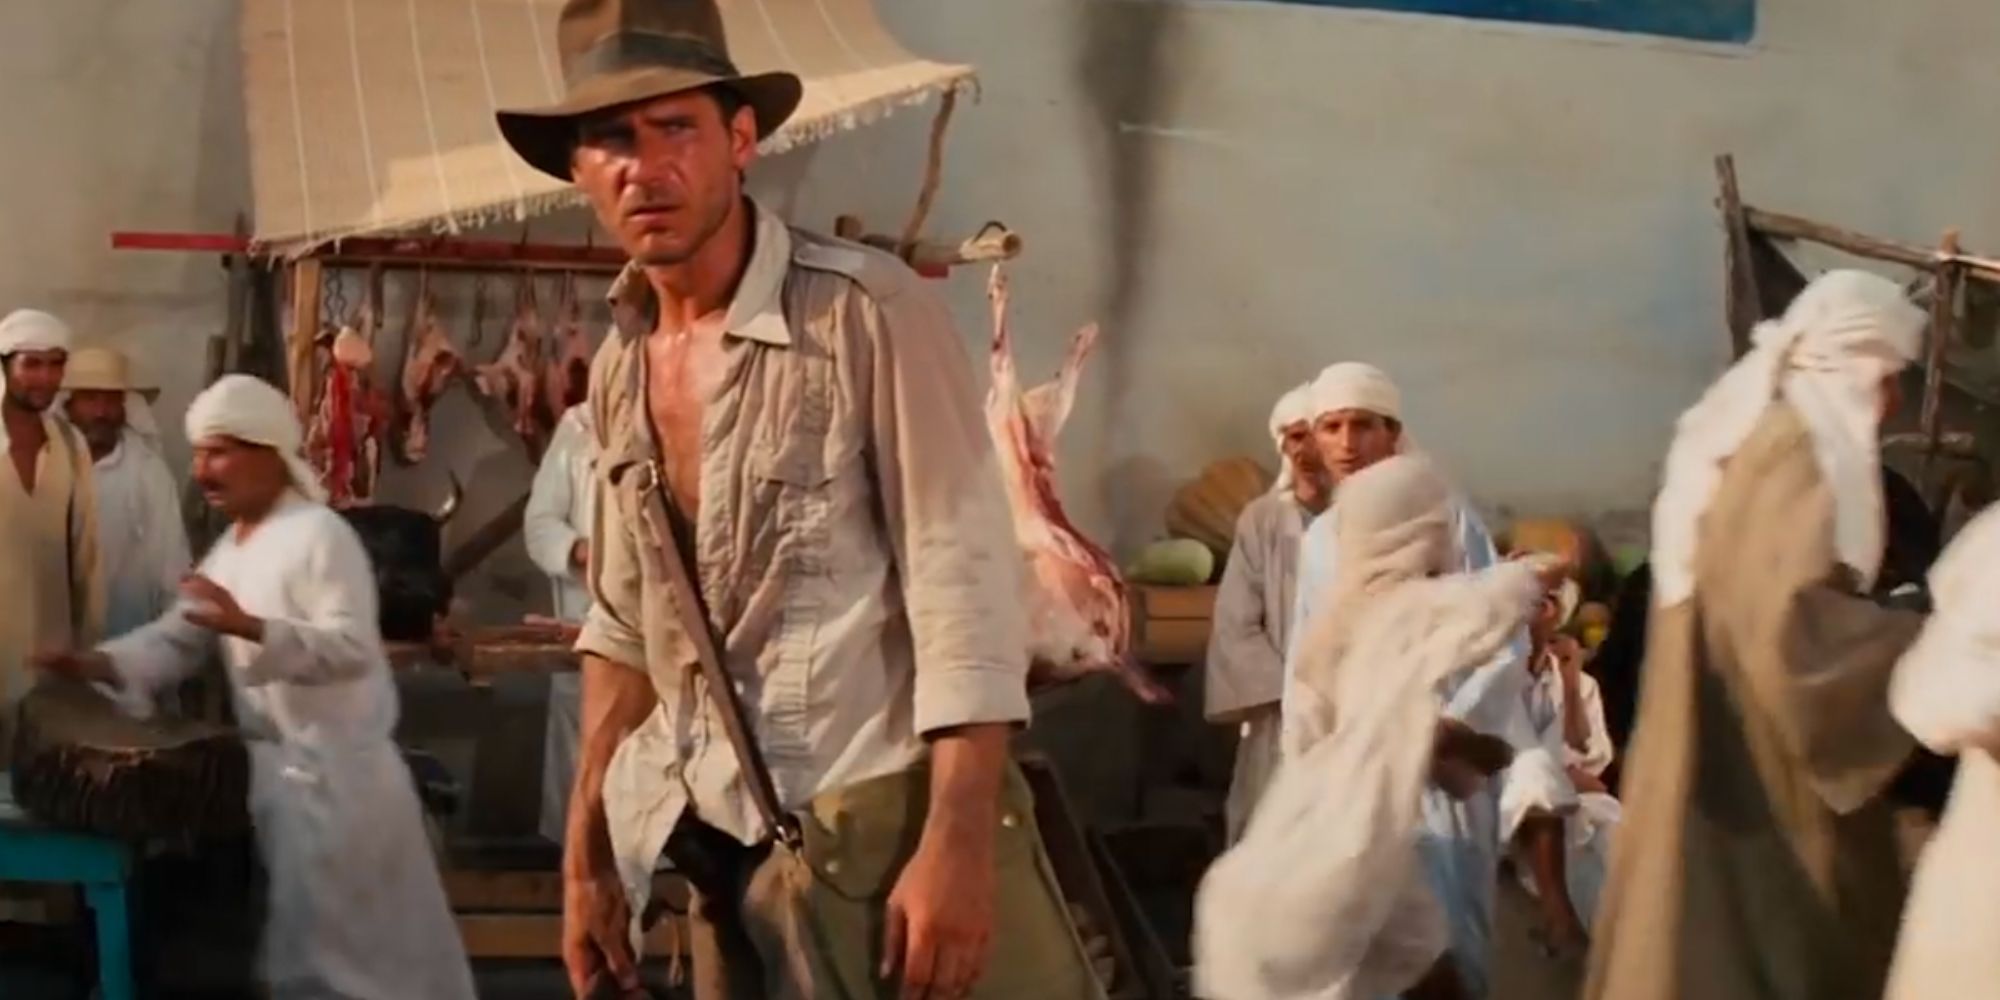 Indiana Jones, surrounded by Egyptian citizens, prepares for a fight